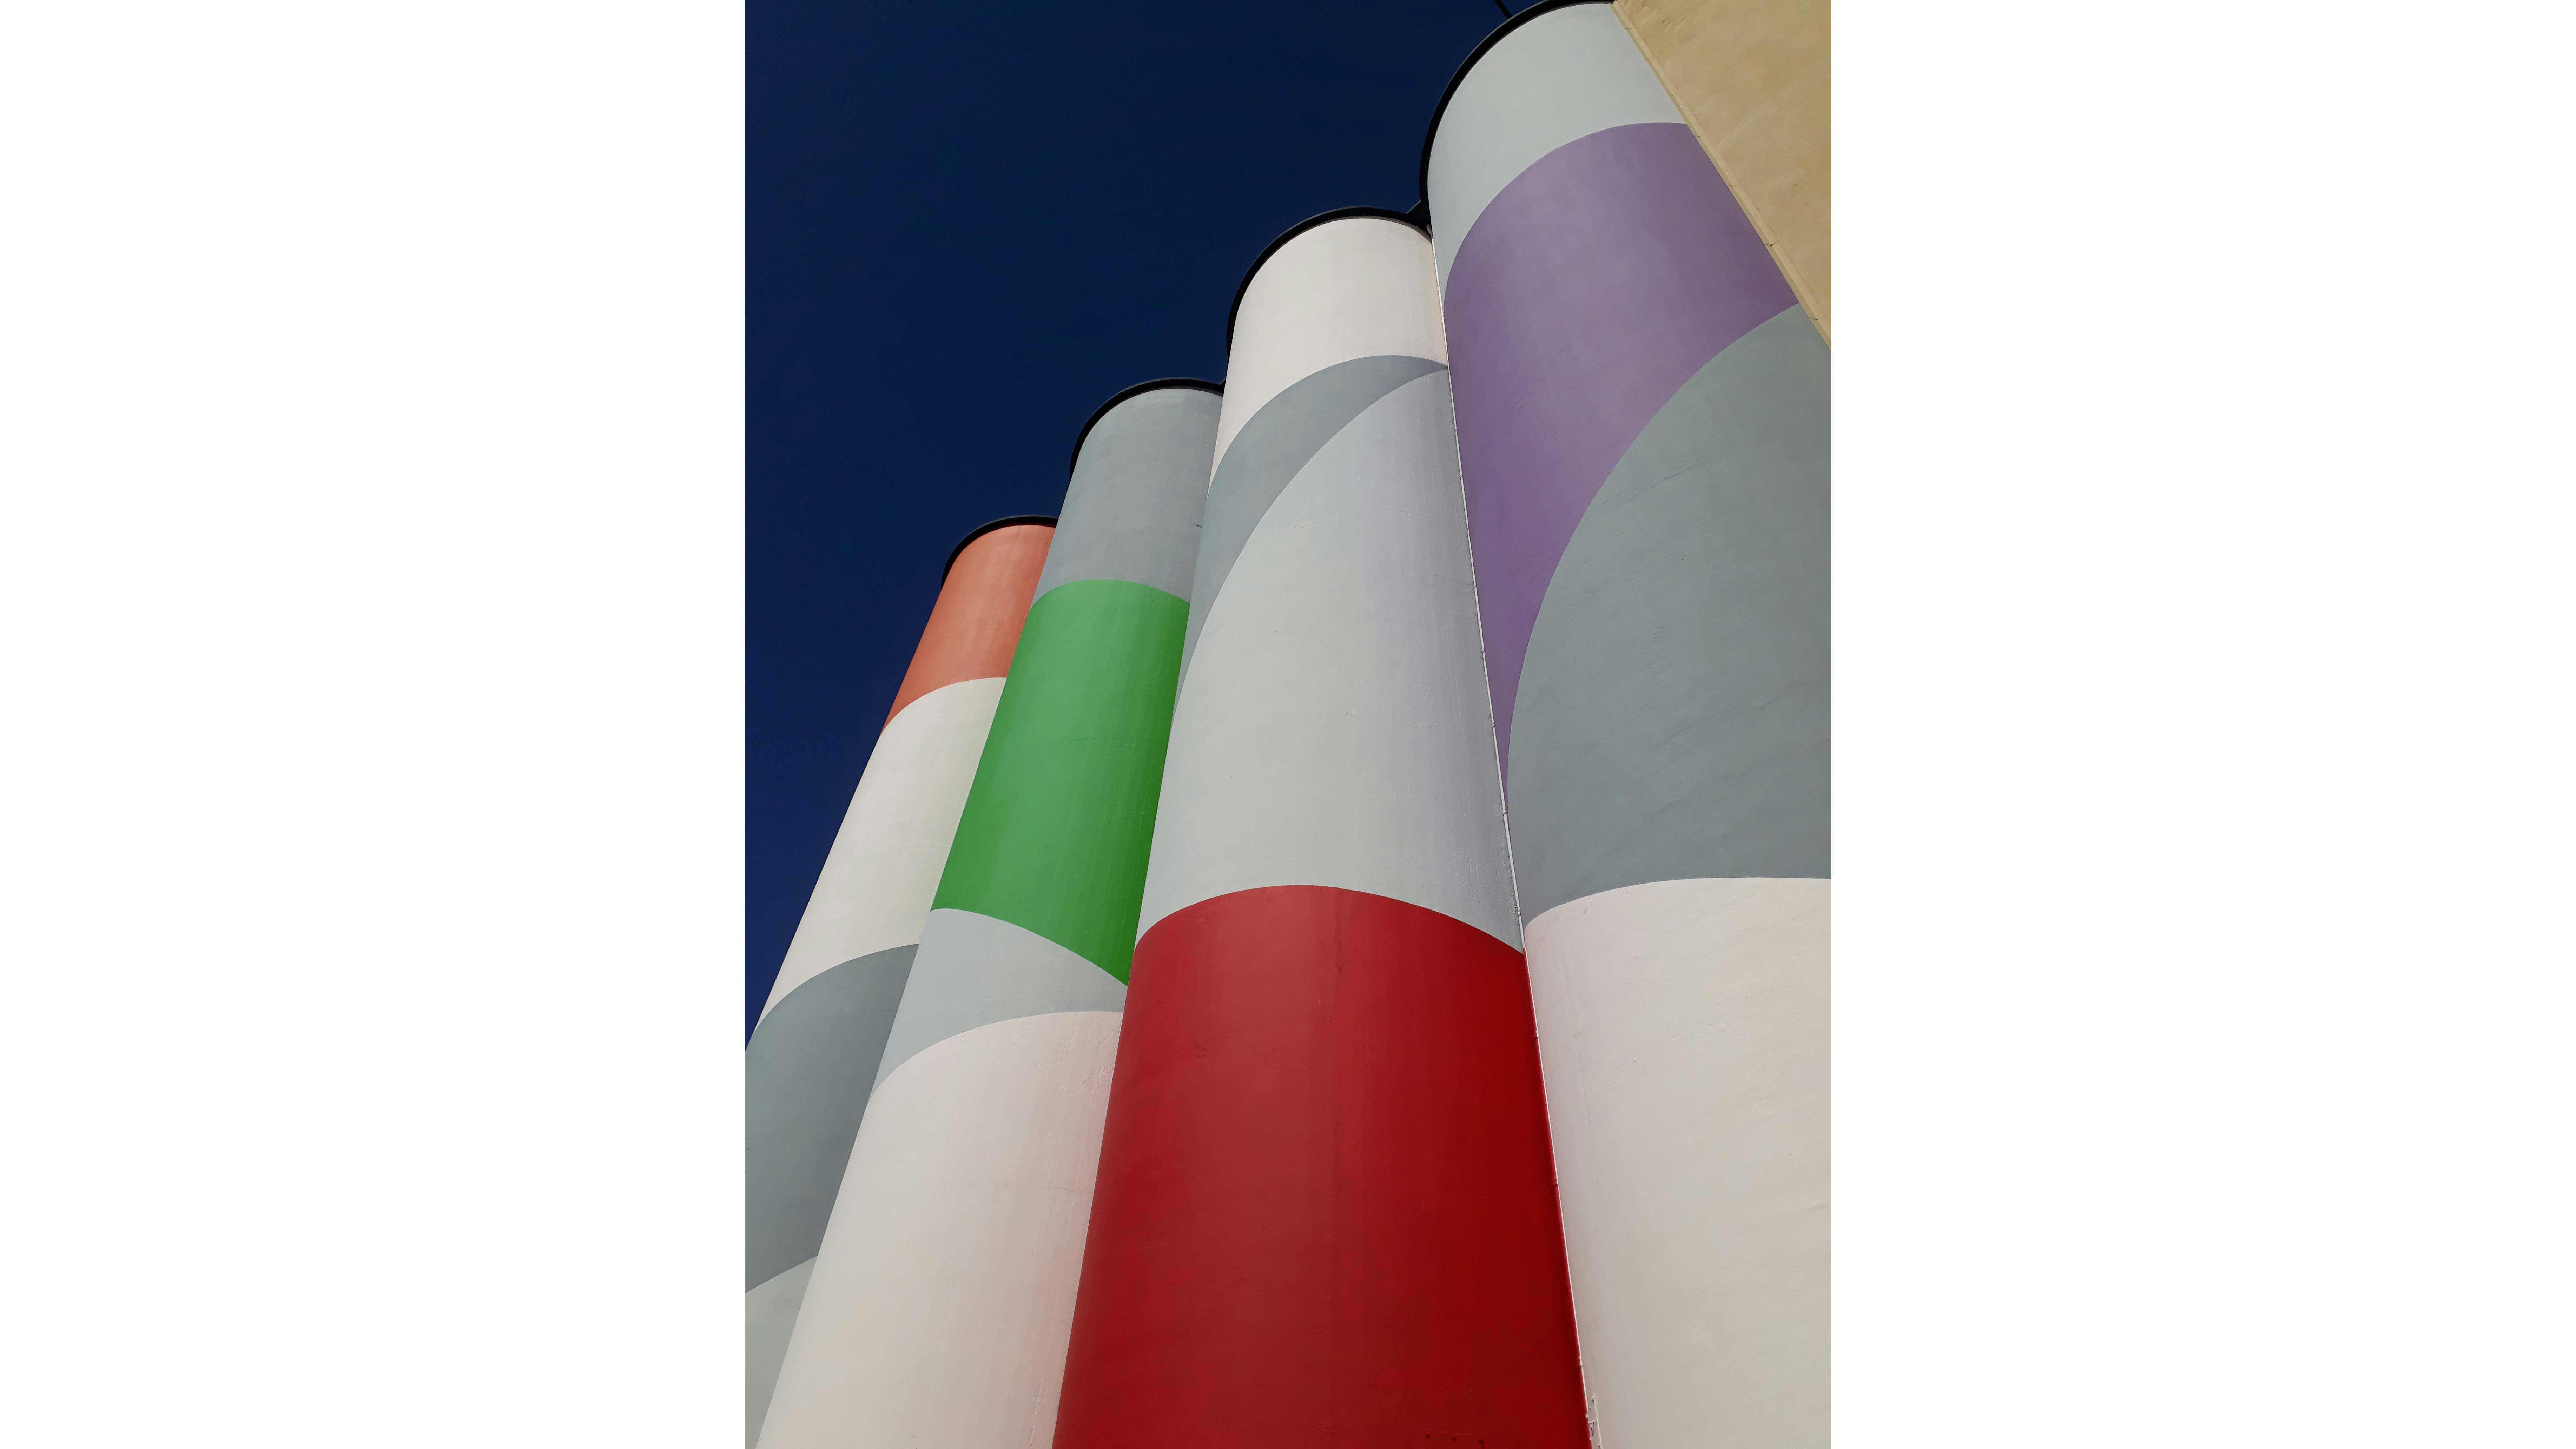 Silos painted in various colors, set against a beautiful blue sky.